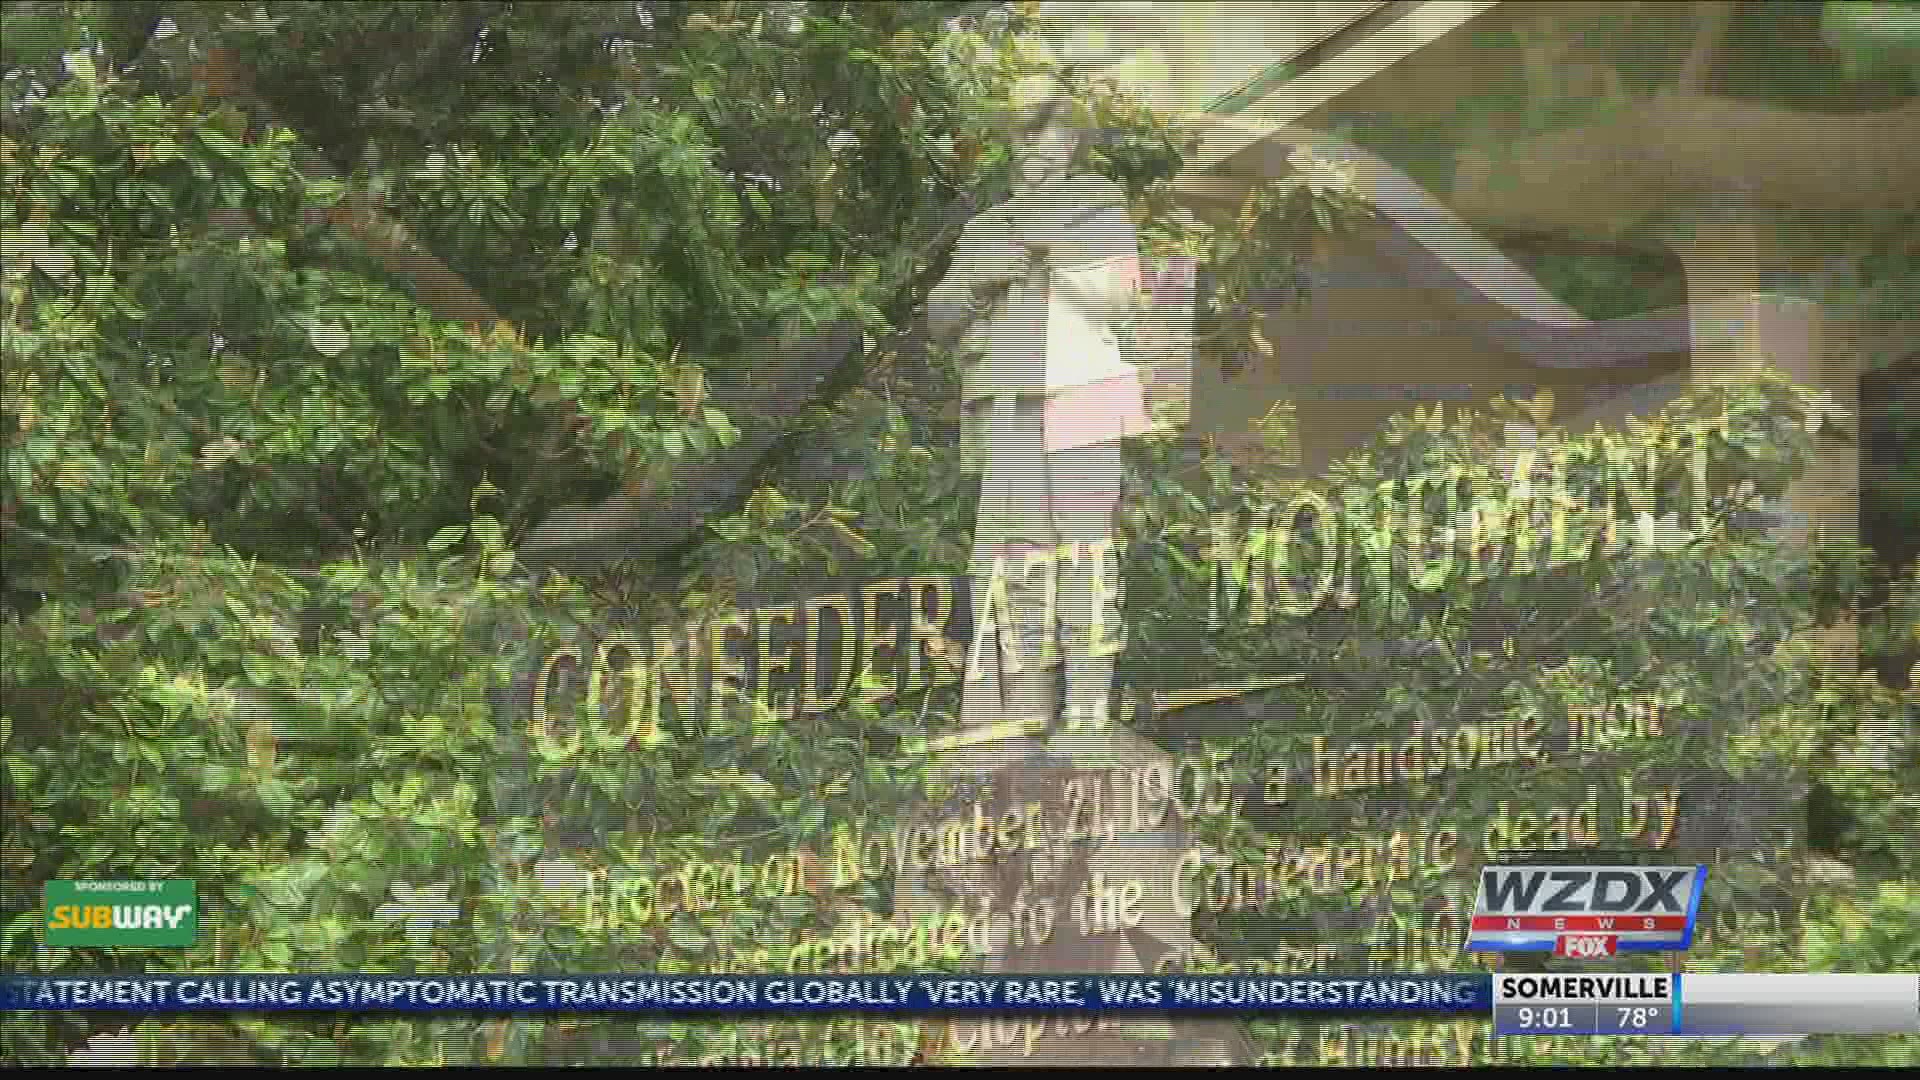 A Confederate statue erected over a century ago, is no longer sitting well with some locals. Groups and leaders are calling for its removal and relocation.